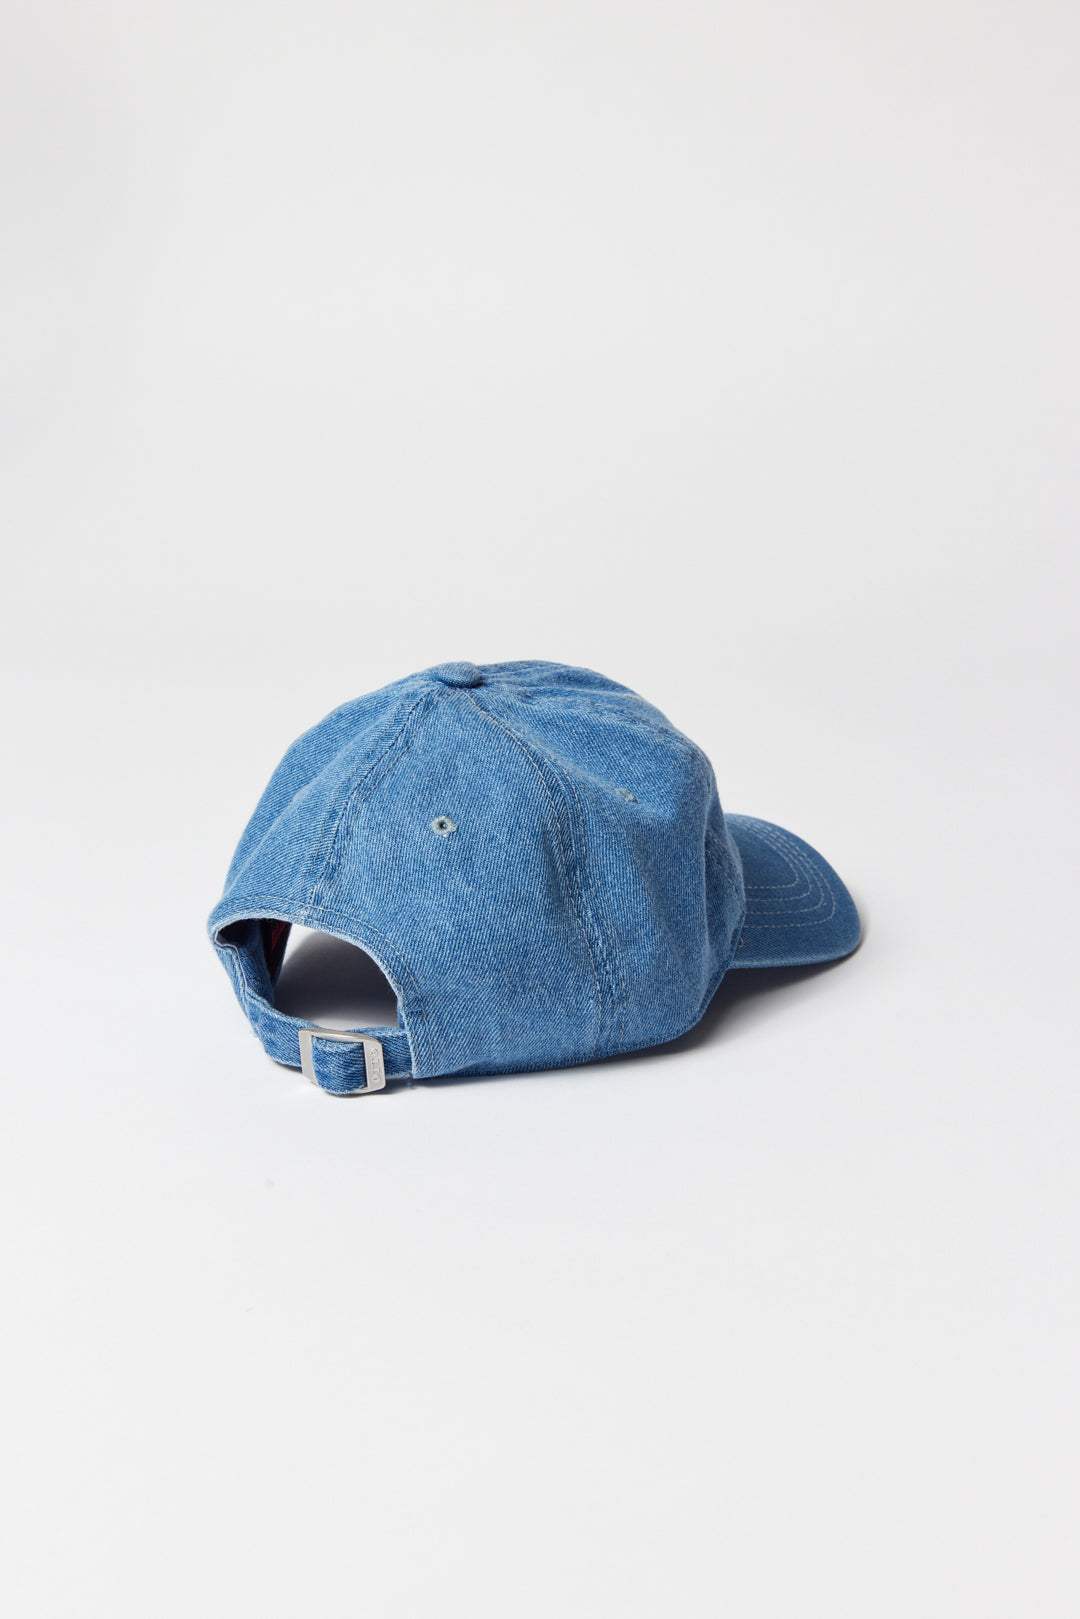 The Combahee River Collective Denim Hat